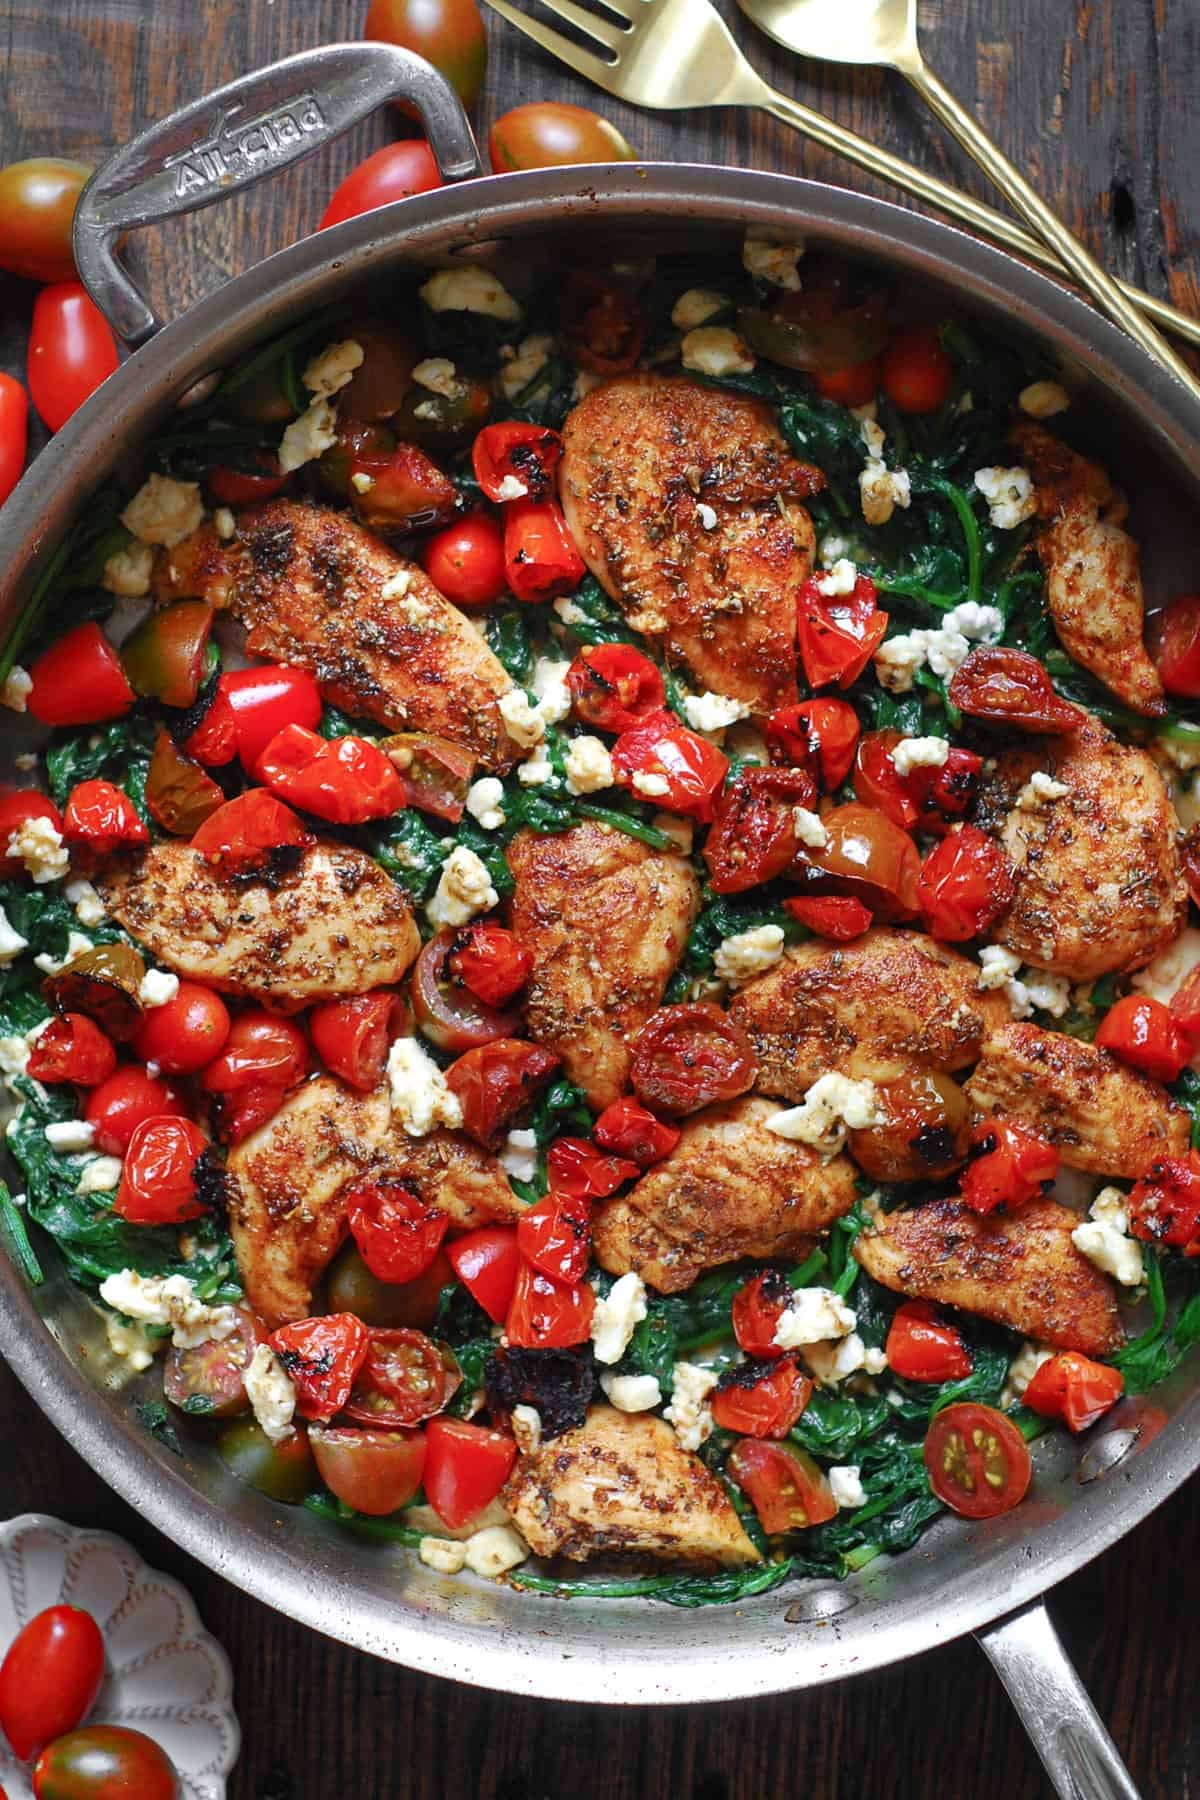 Mediterranean Chicken Stir Fry with Vegetables (Tomatoes and Spinach) and Feta Cheese - in a stainless steel pan.